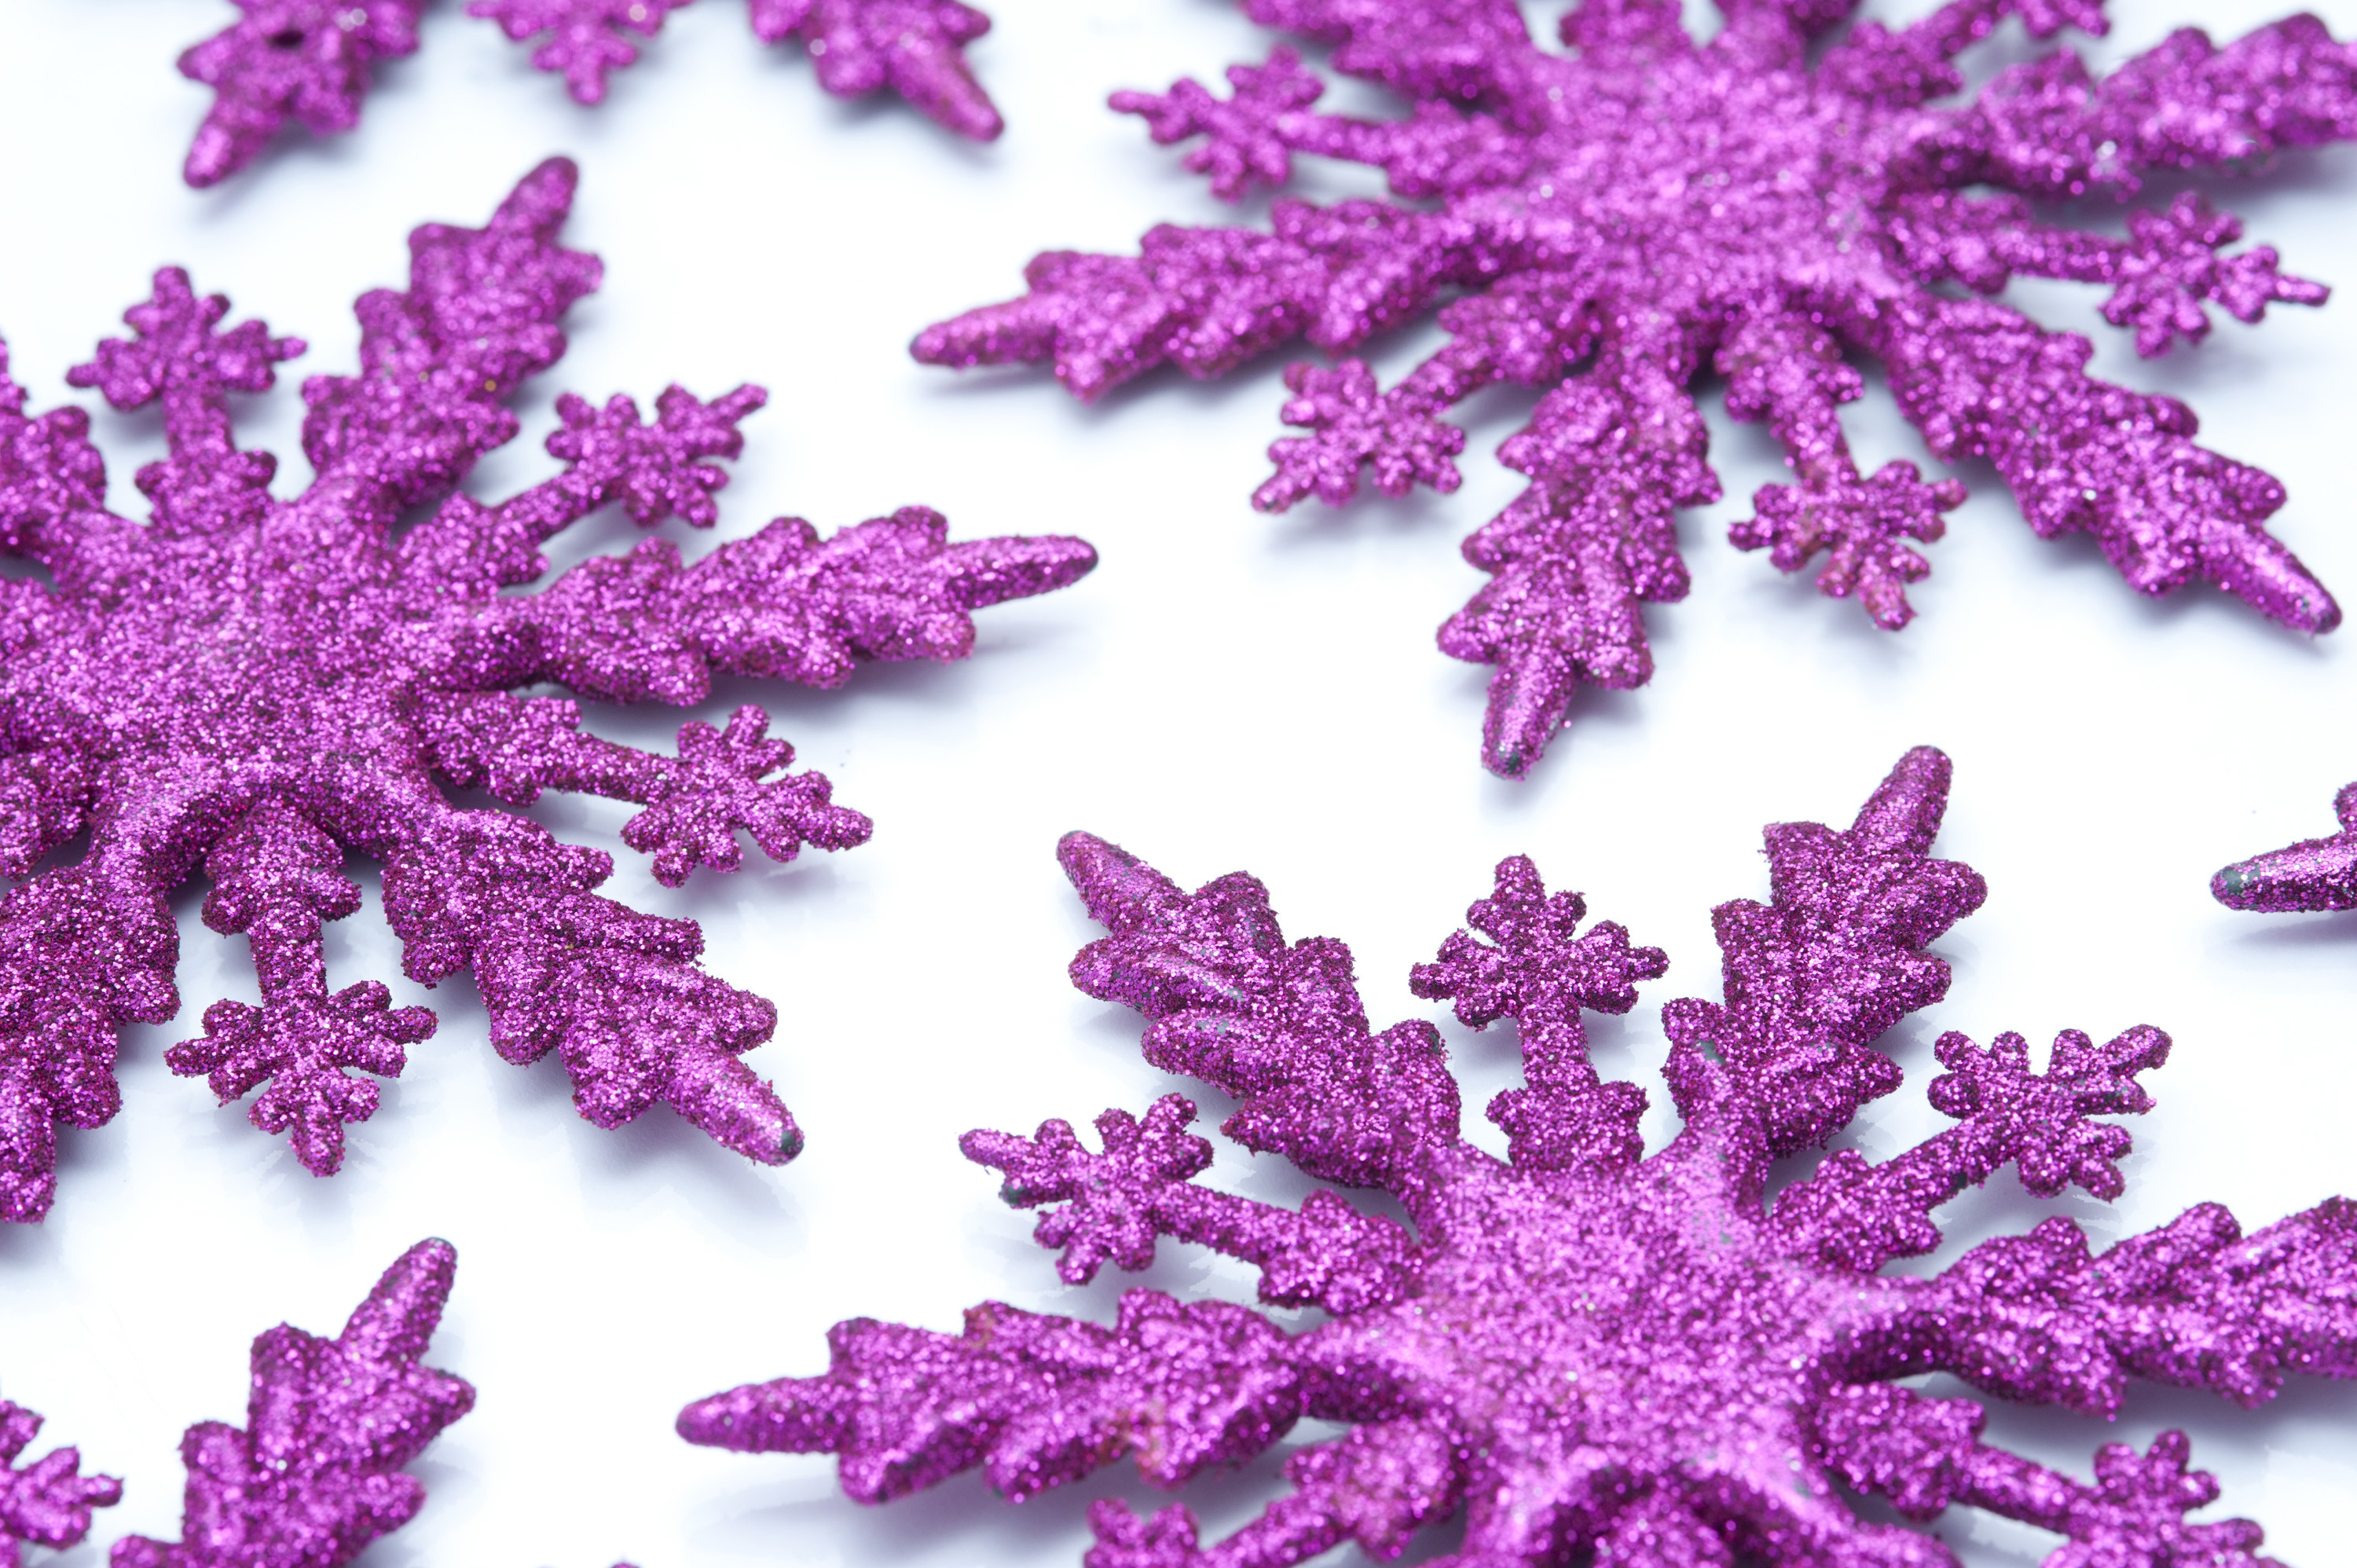 3000x1996 Pink snowflake ornaments with textured glitter surfaces scattered on a  white background to celebrate the festive